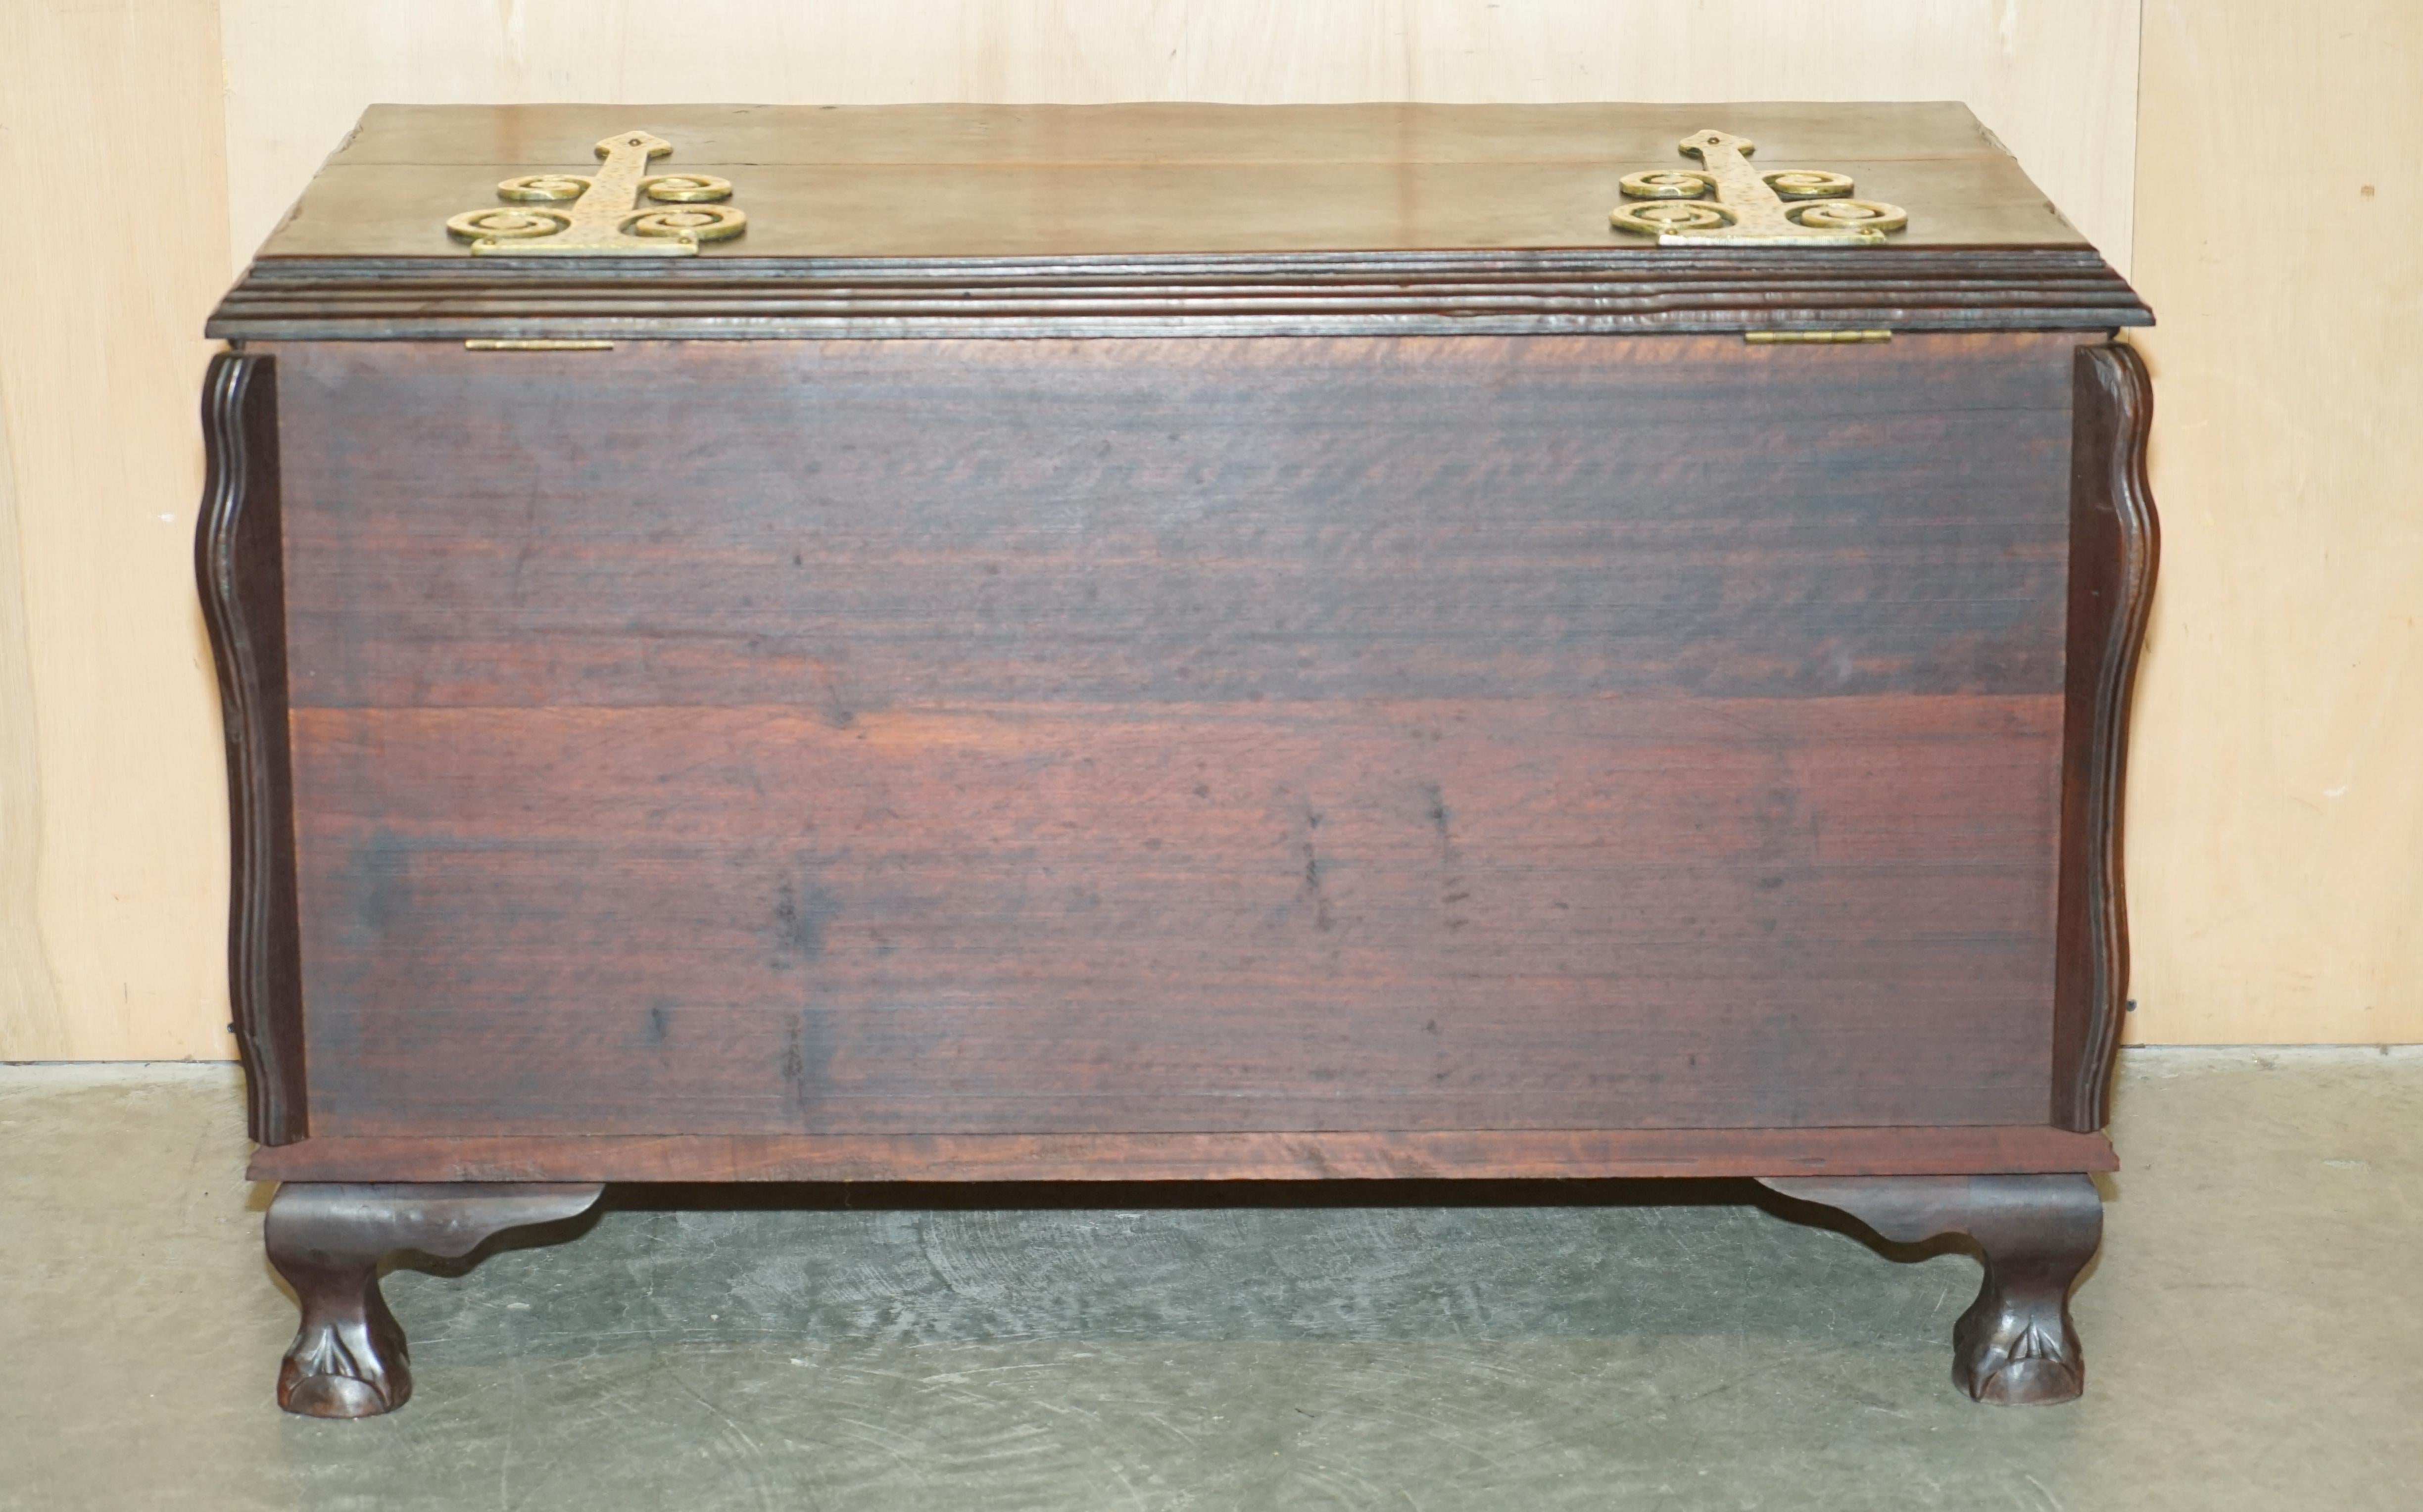 ViNTAGE HAND CARved HARDWOOD TRUNK OR CHEST WITH ORNATE OVERSIZED BRASS FITTINGS im Angebot 7